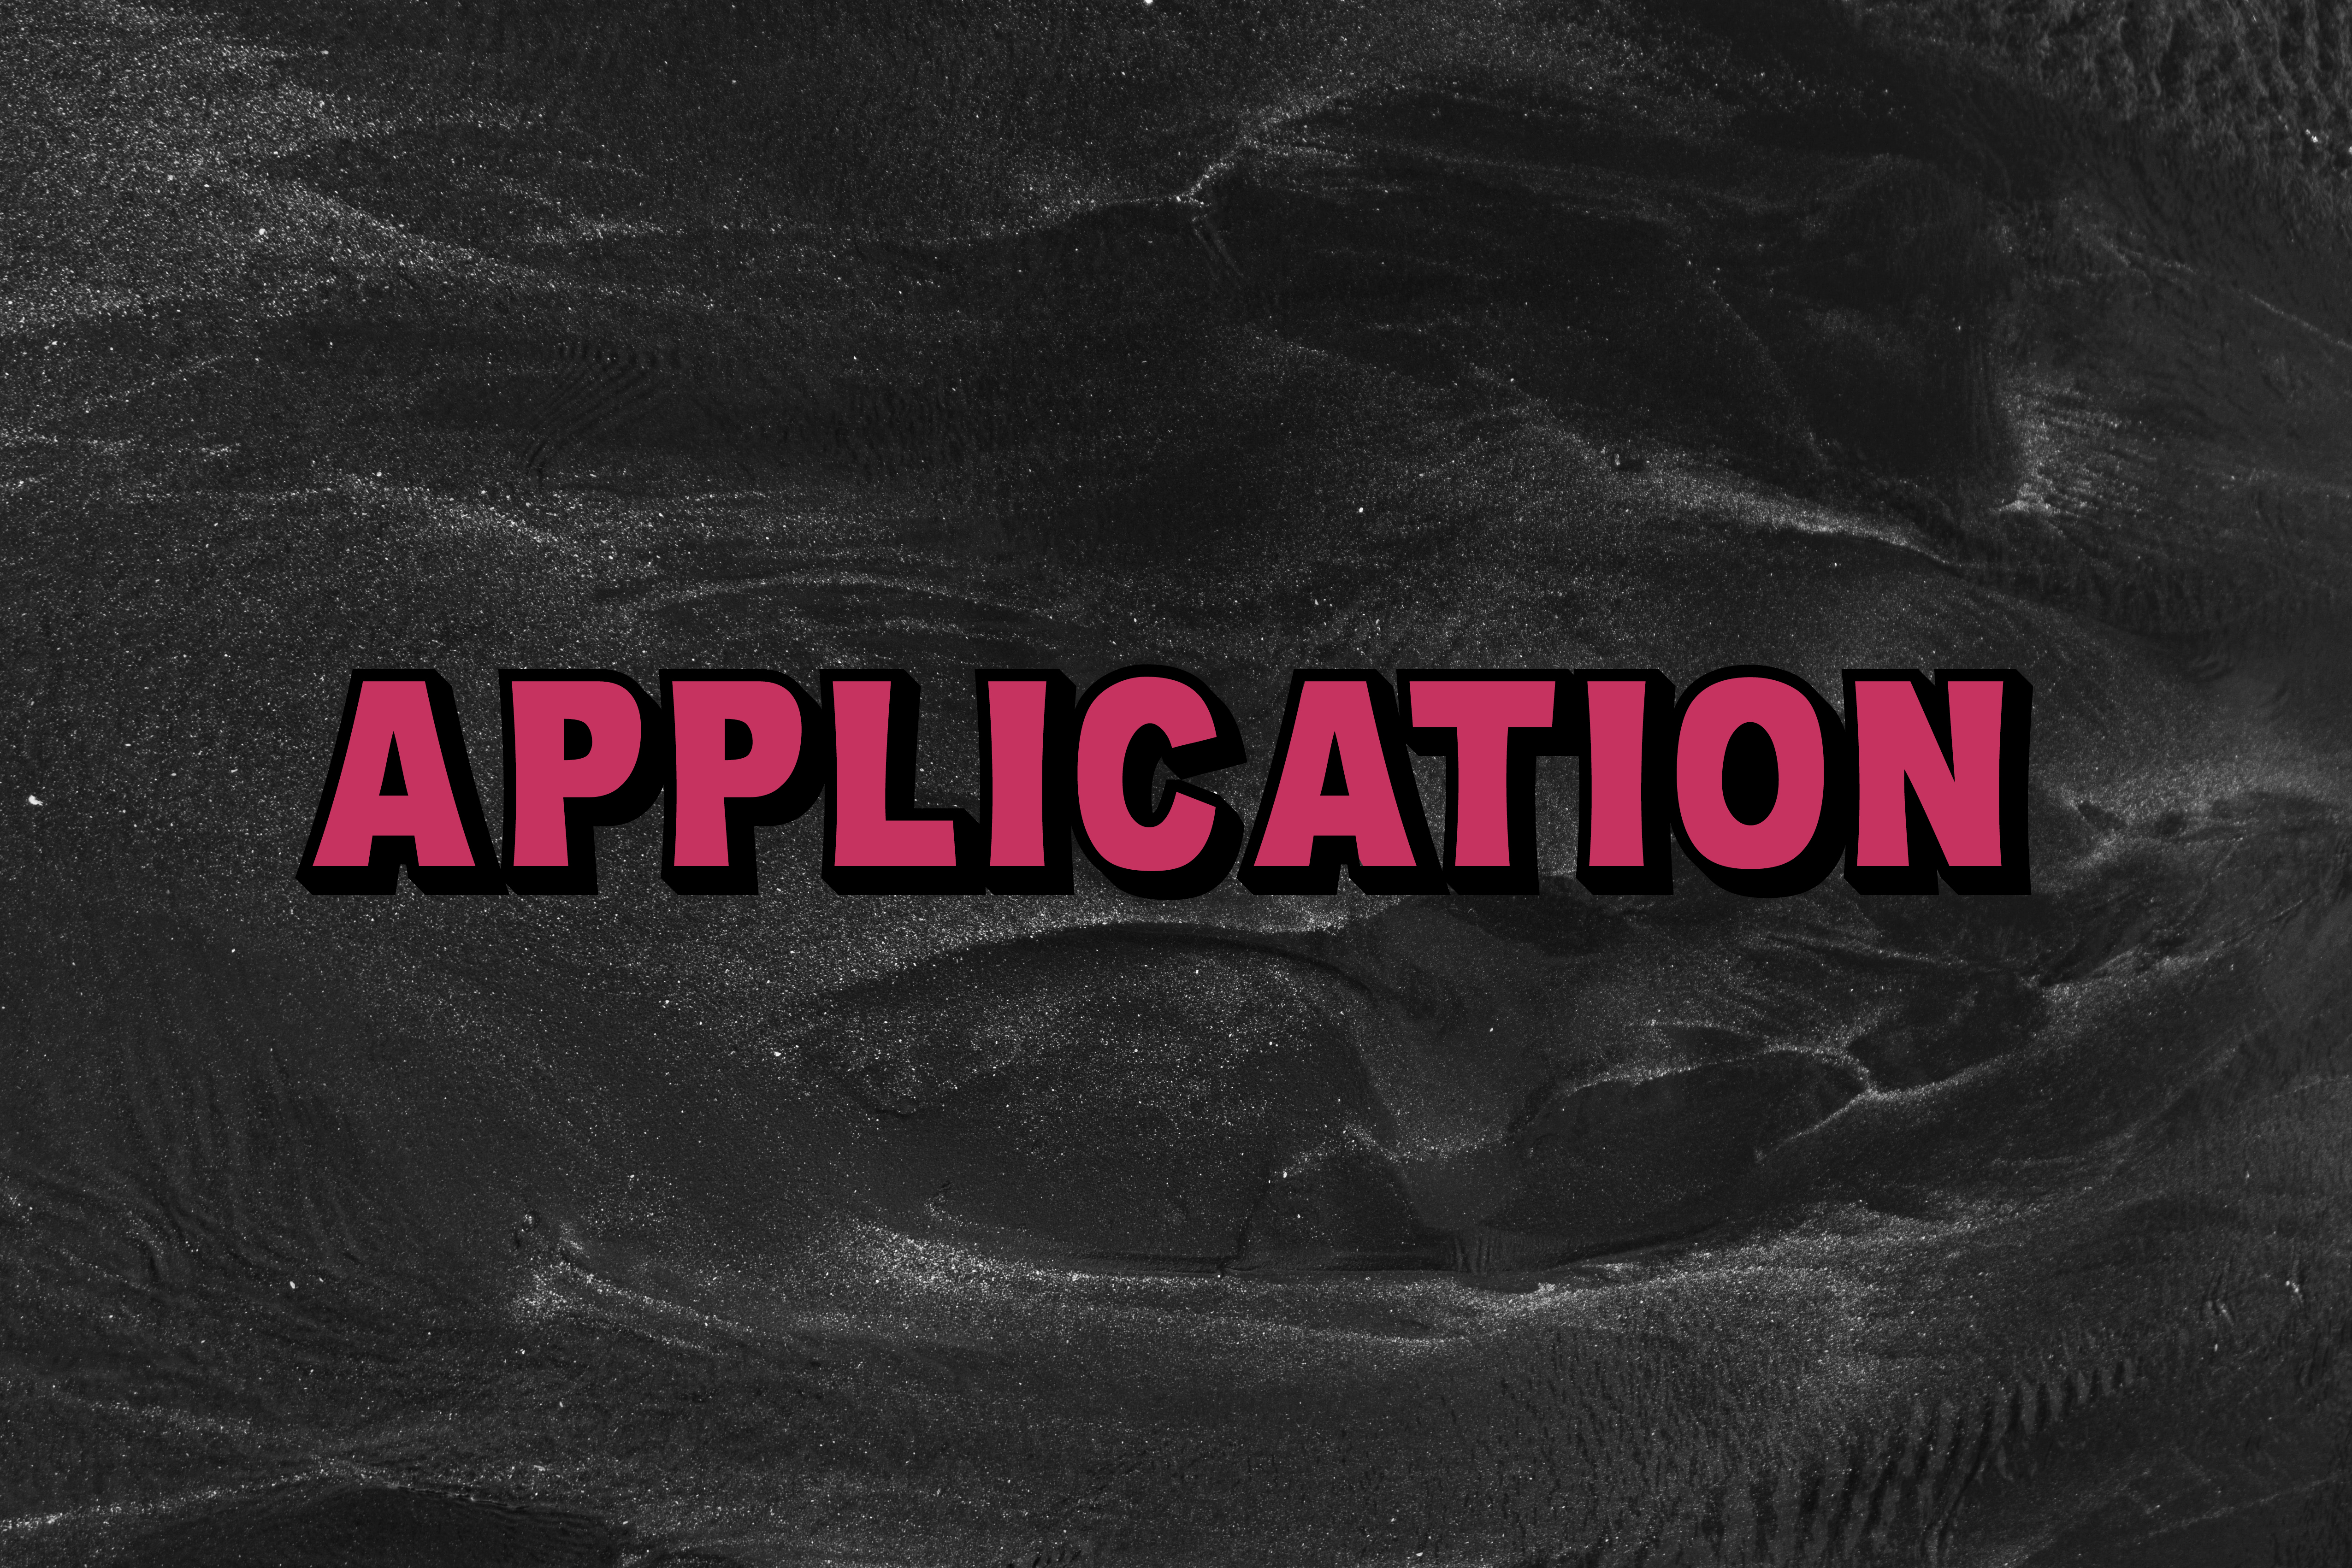 The word 'application' in block pink letters on a black and white swirly background.